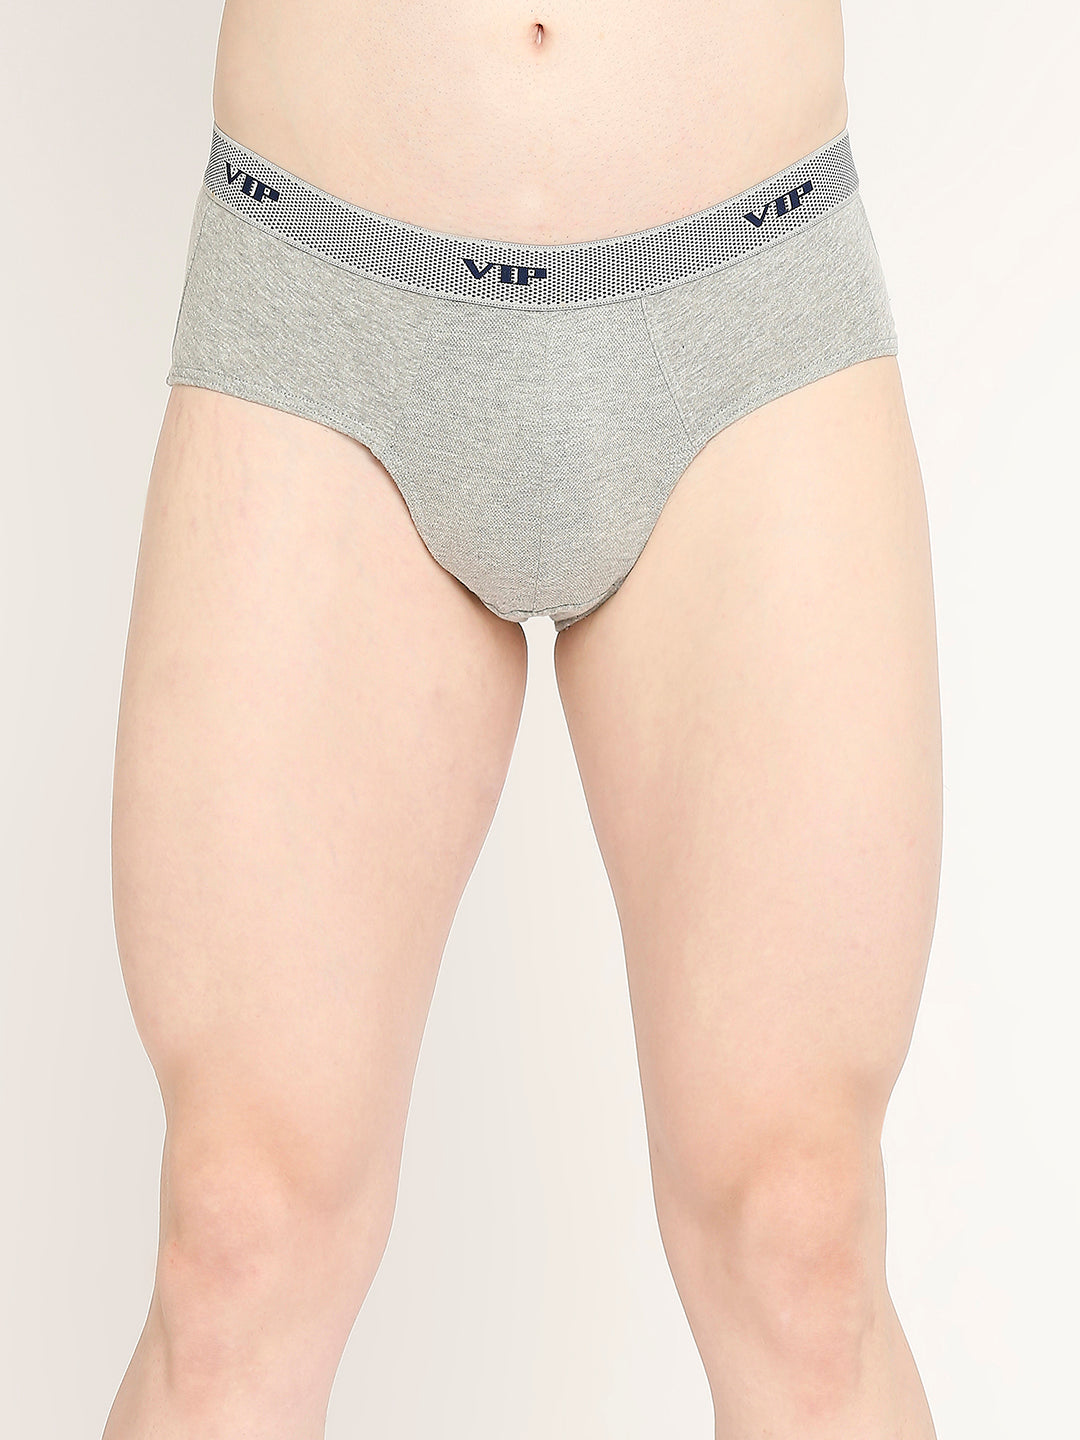 Fresh - Men's Soft Cotton Briefs with Air Mesh Panel in Assorted Colors - AS02